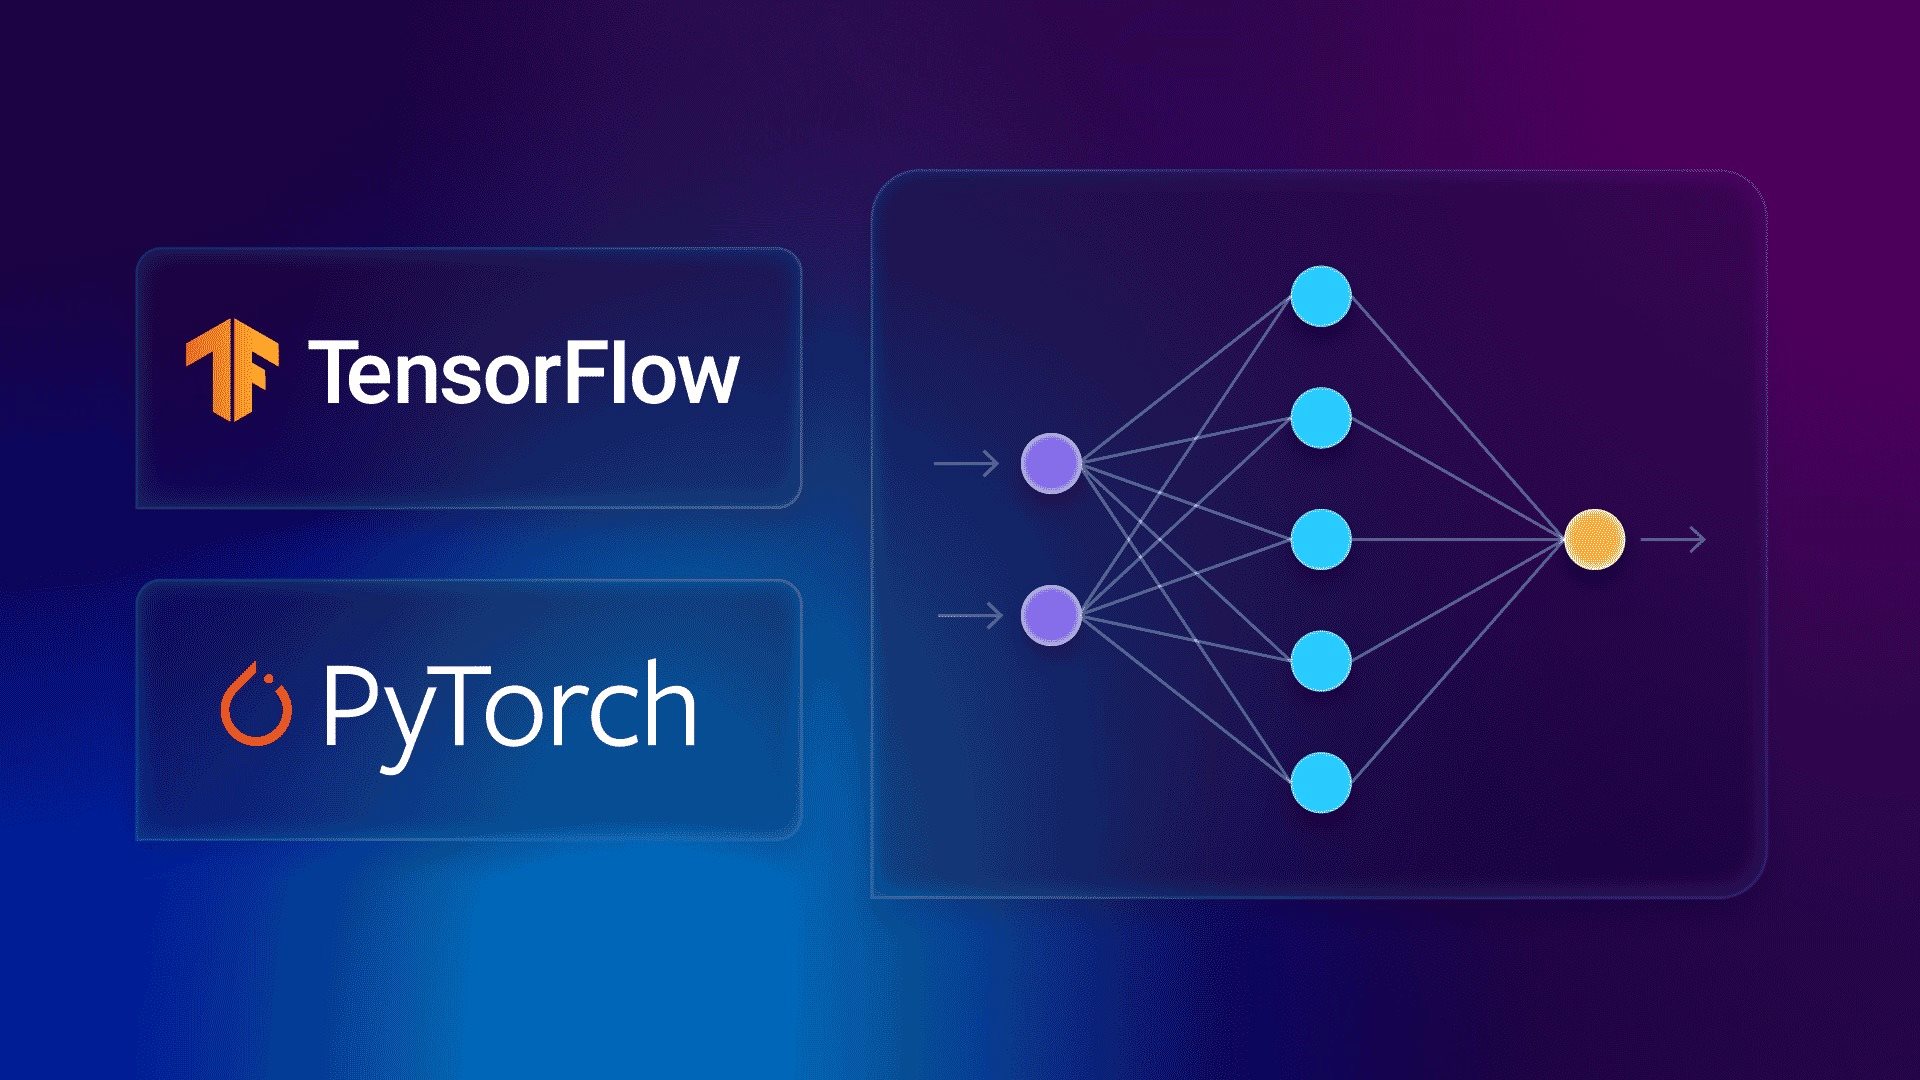 tensorflow-and-pytorch-are-which-type-of-machine-learning